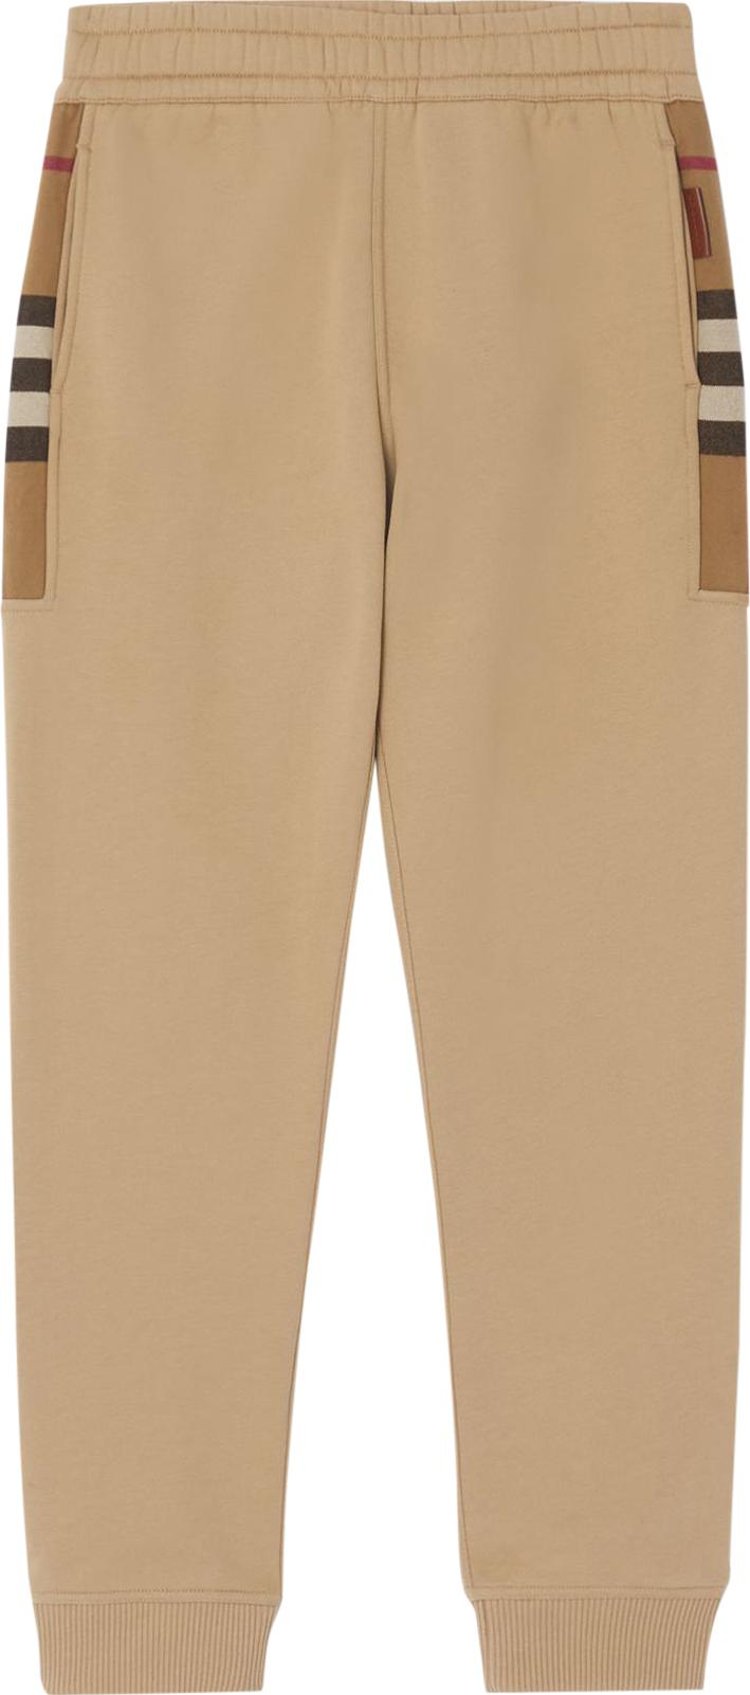 Buy Burberry Check Side Panel Sweatpants 'Camel' - 8045014